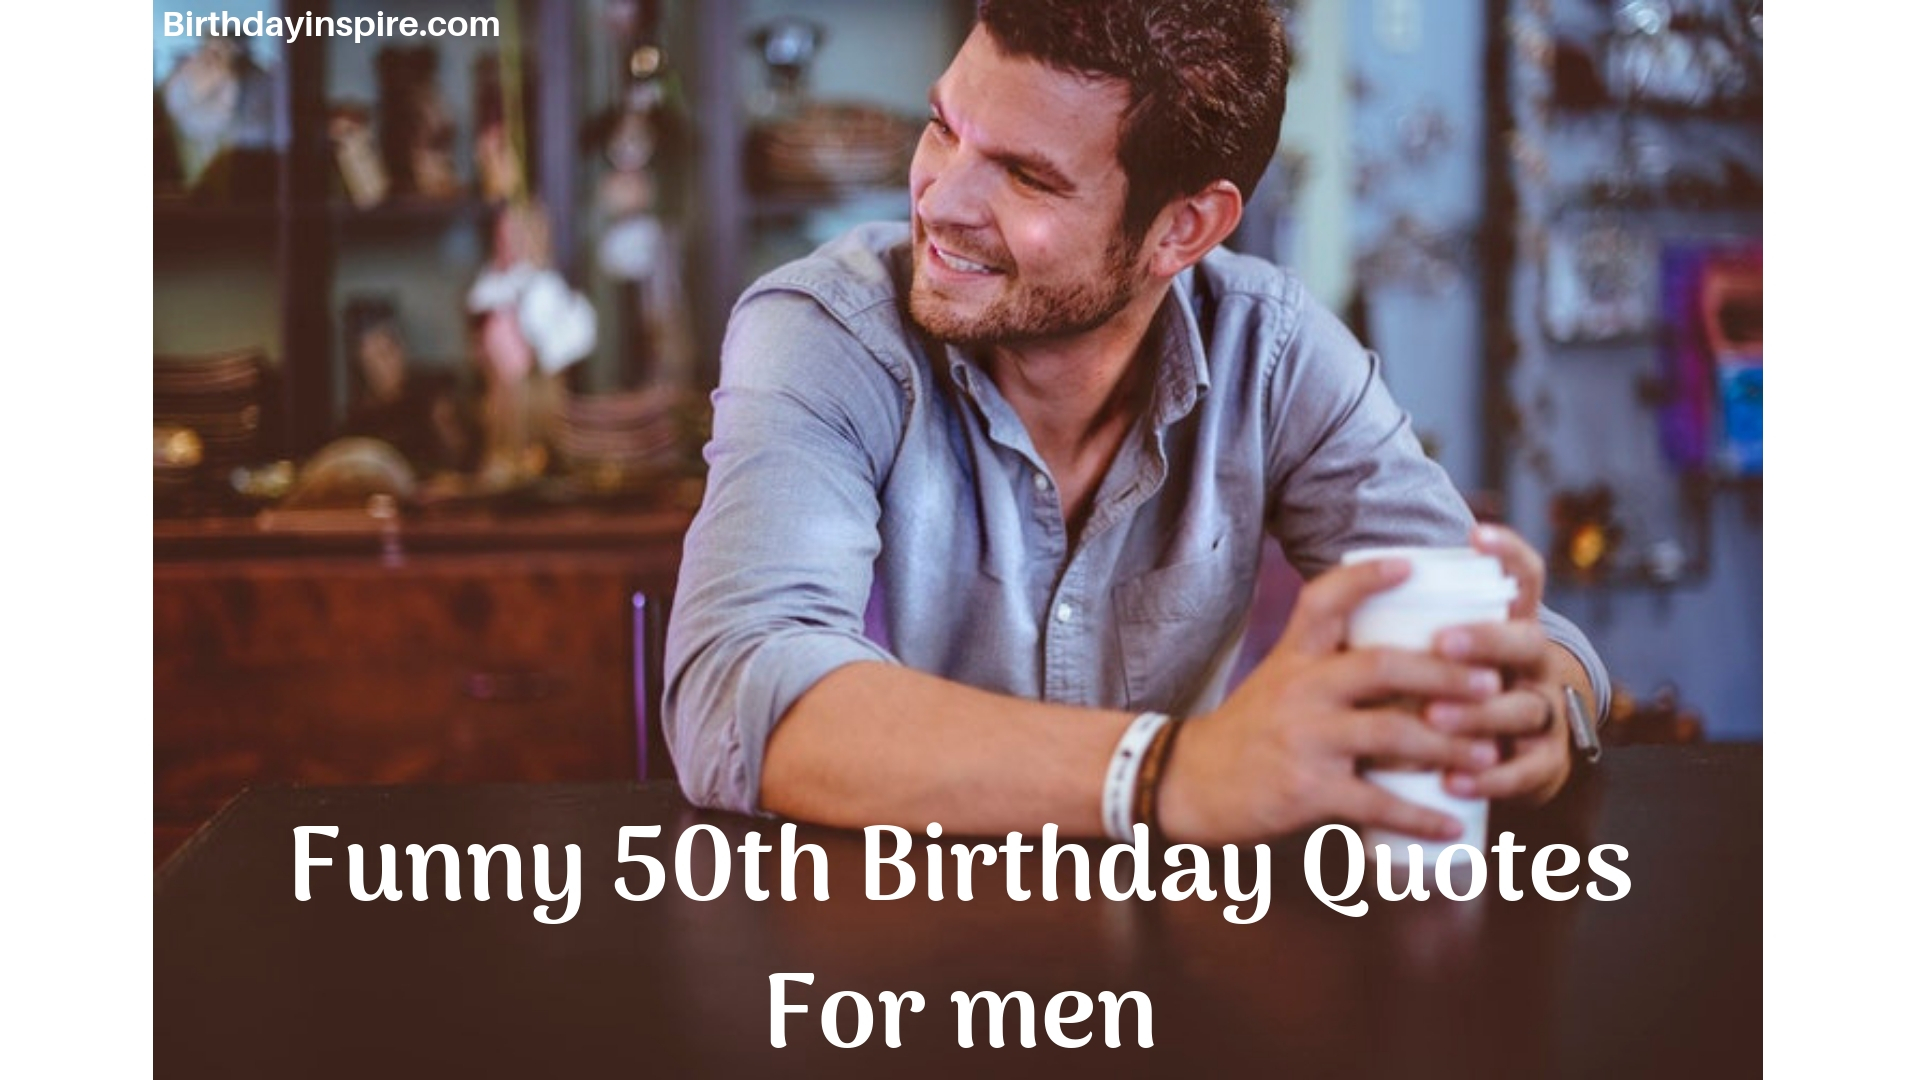 funny 50th birthday quotes for men